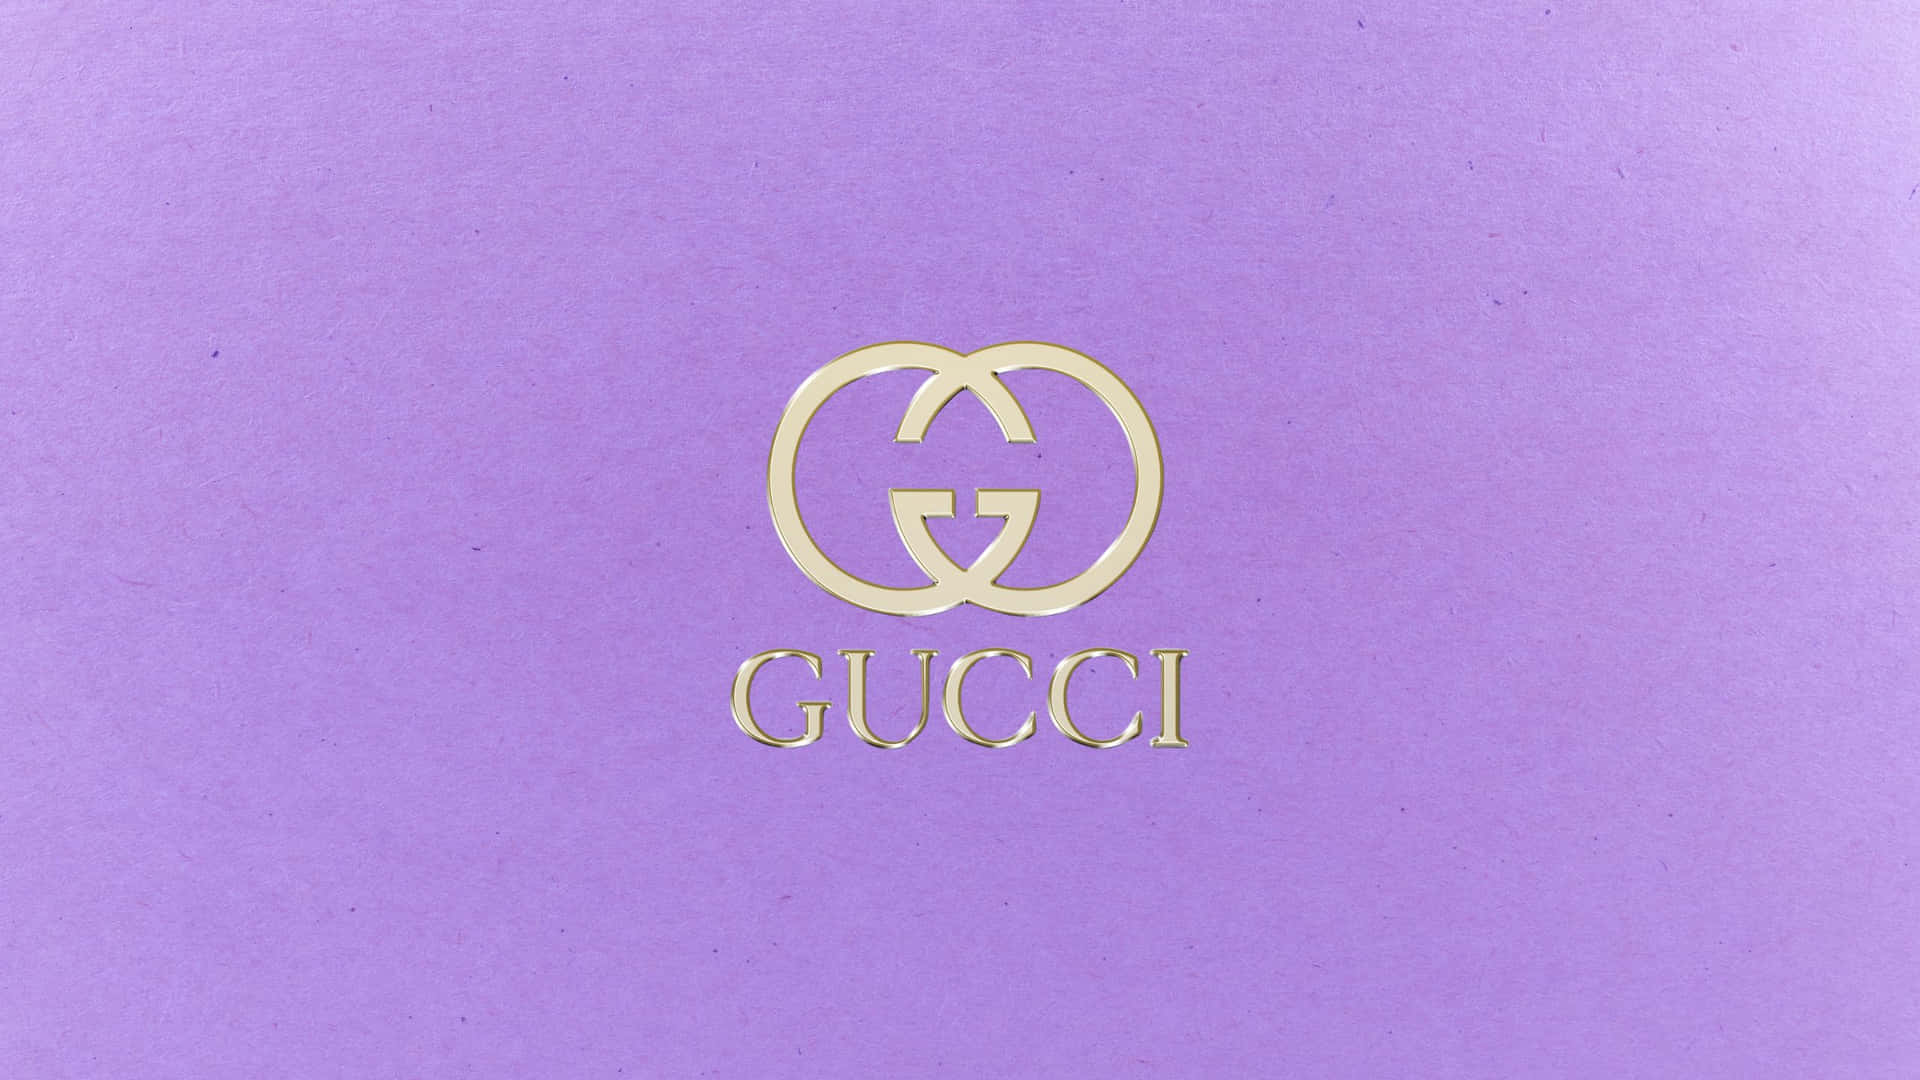 Look sophistication and luxury in this elegant Purple Gucci look. Wallpaper